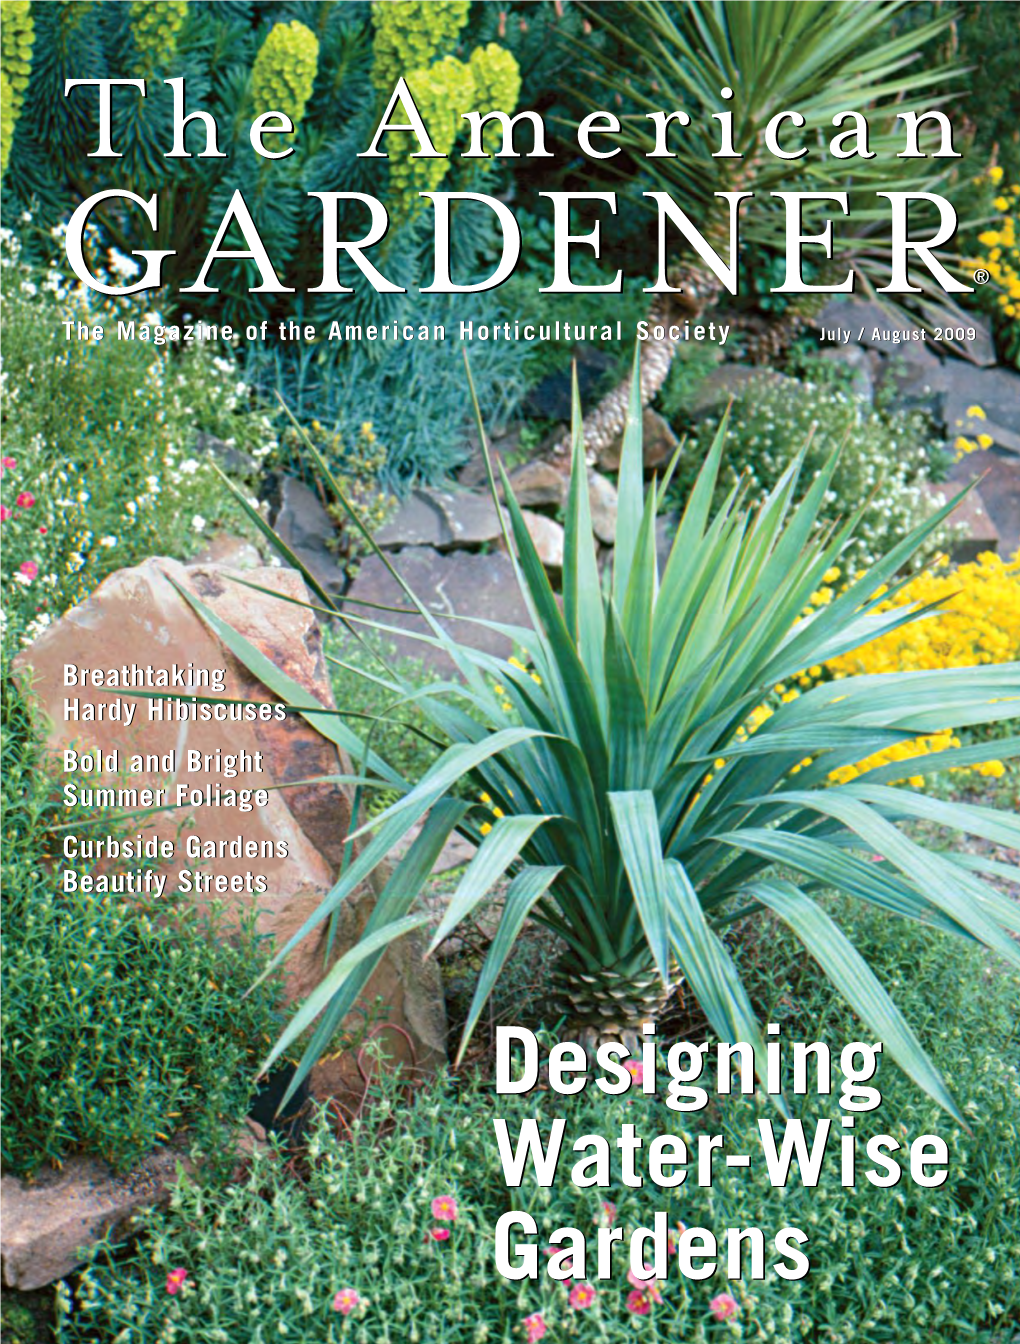 GARDENERGARDENER® the Magazine of the American Horticultural Society July / August 2009